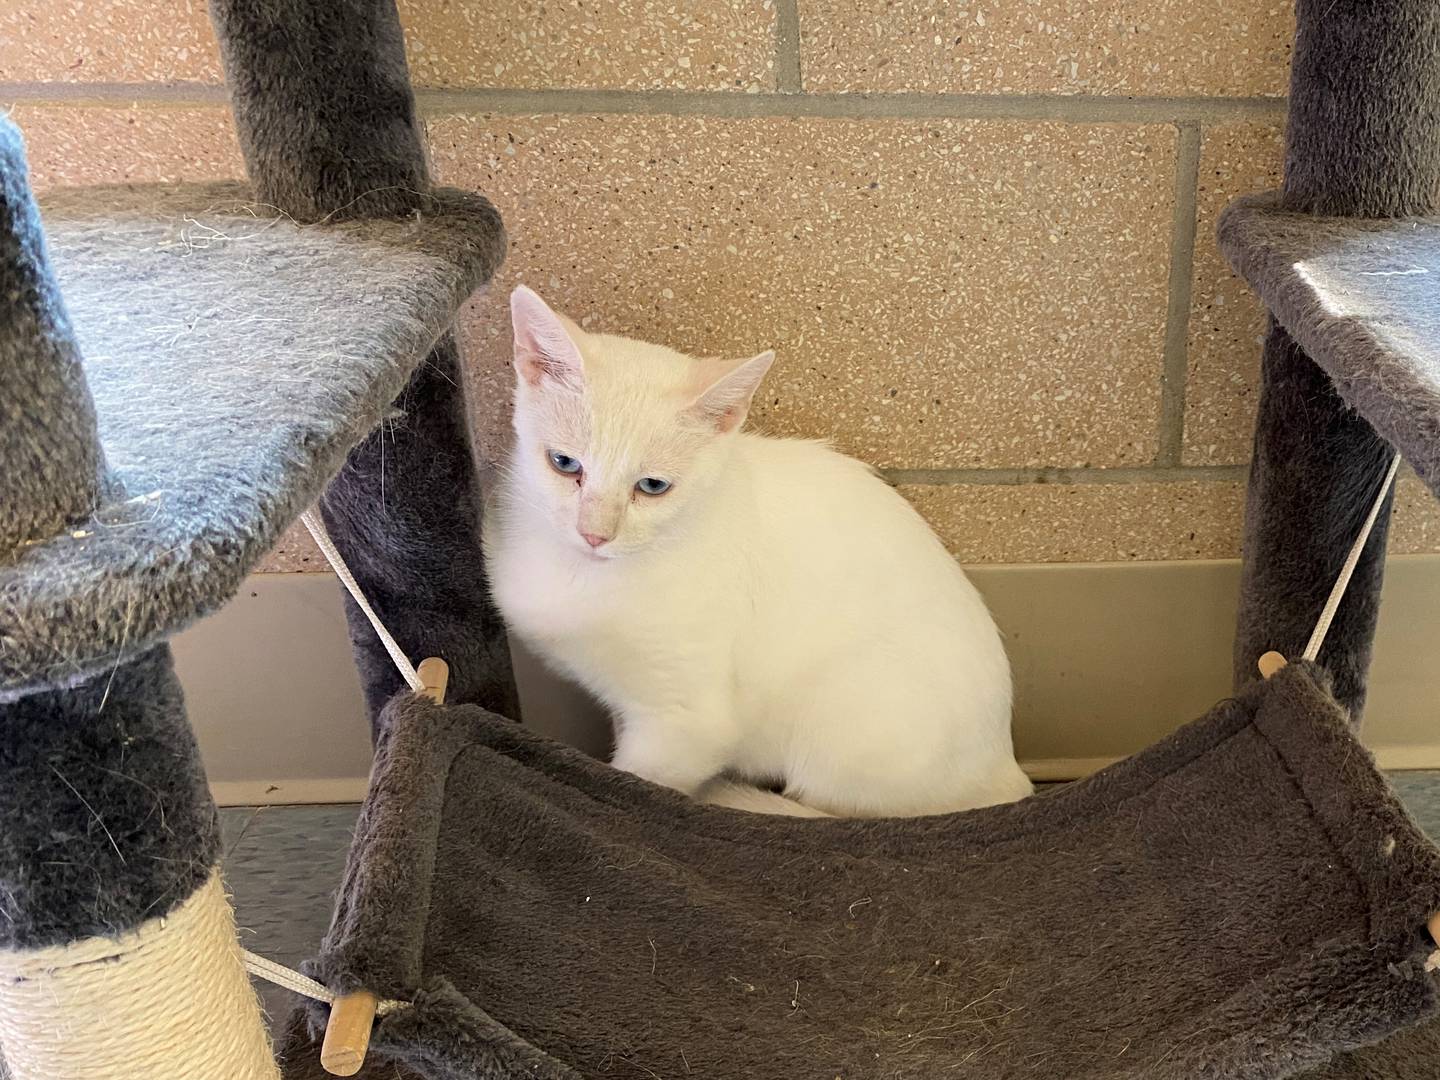 Whisper is a two-year old all white cat that's docile and friendly. She has had kittens prior but is now fixed.